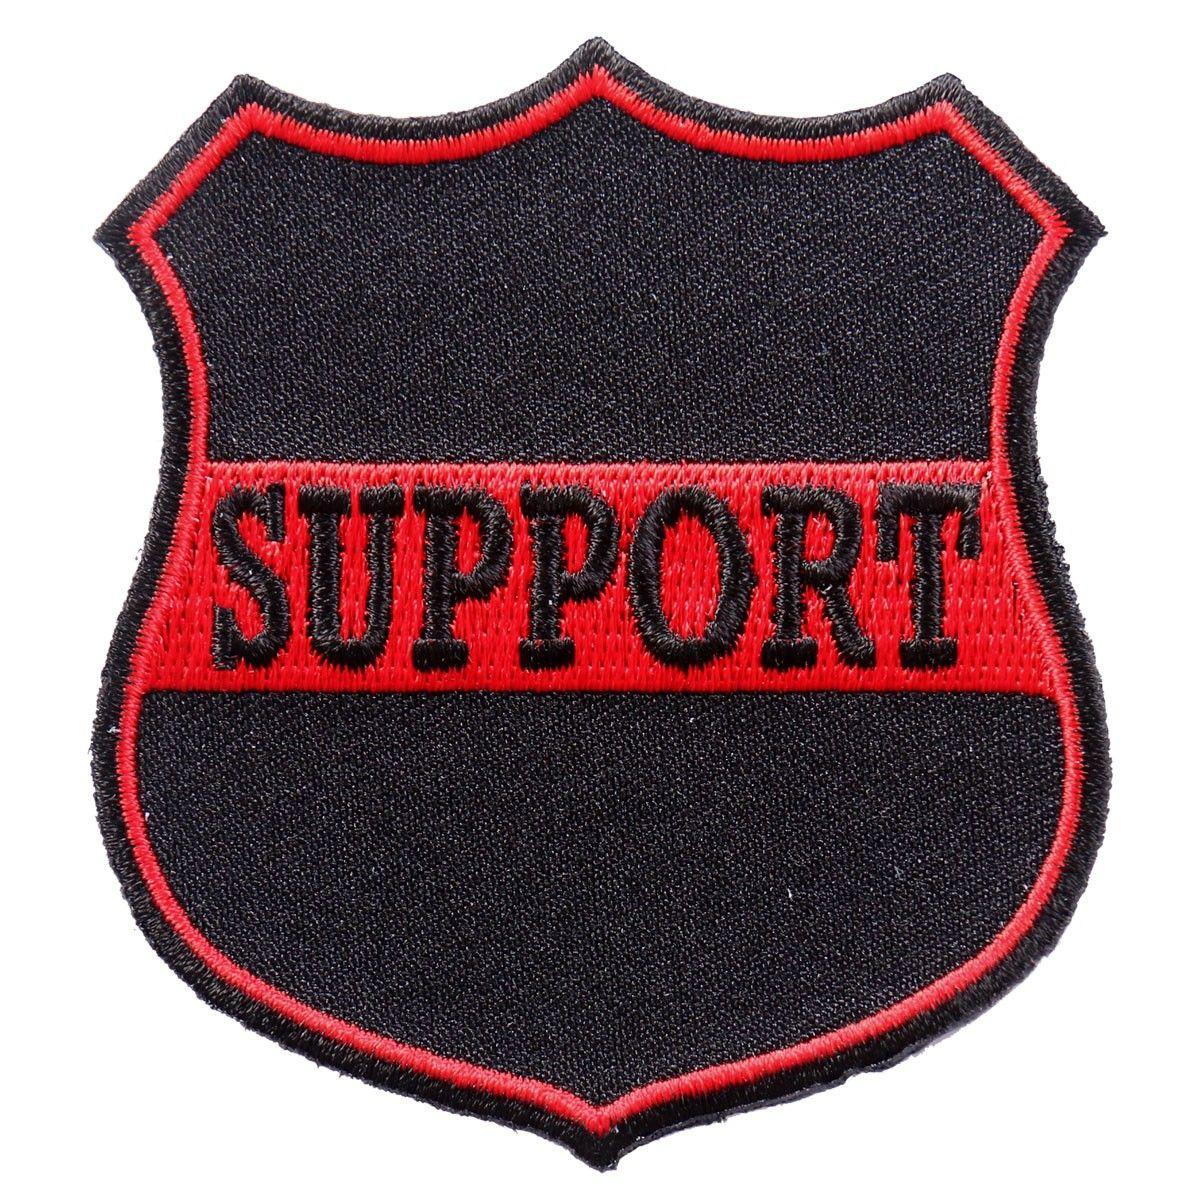 Thin Red P Logo - Thin Red Line Support Patch (3 W x 3 H)